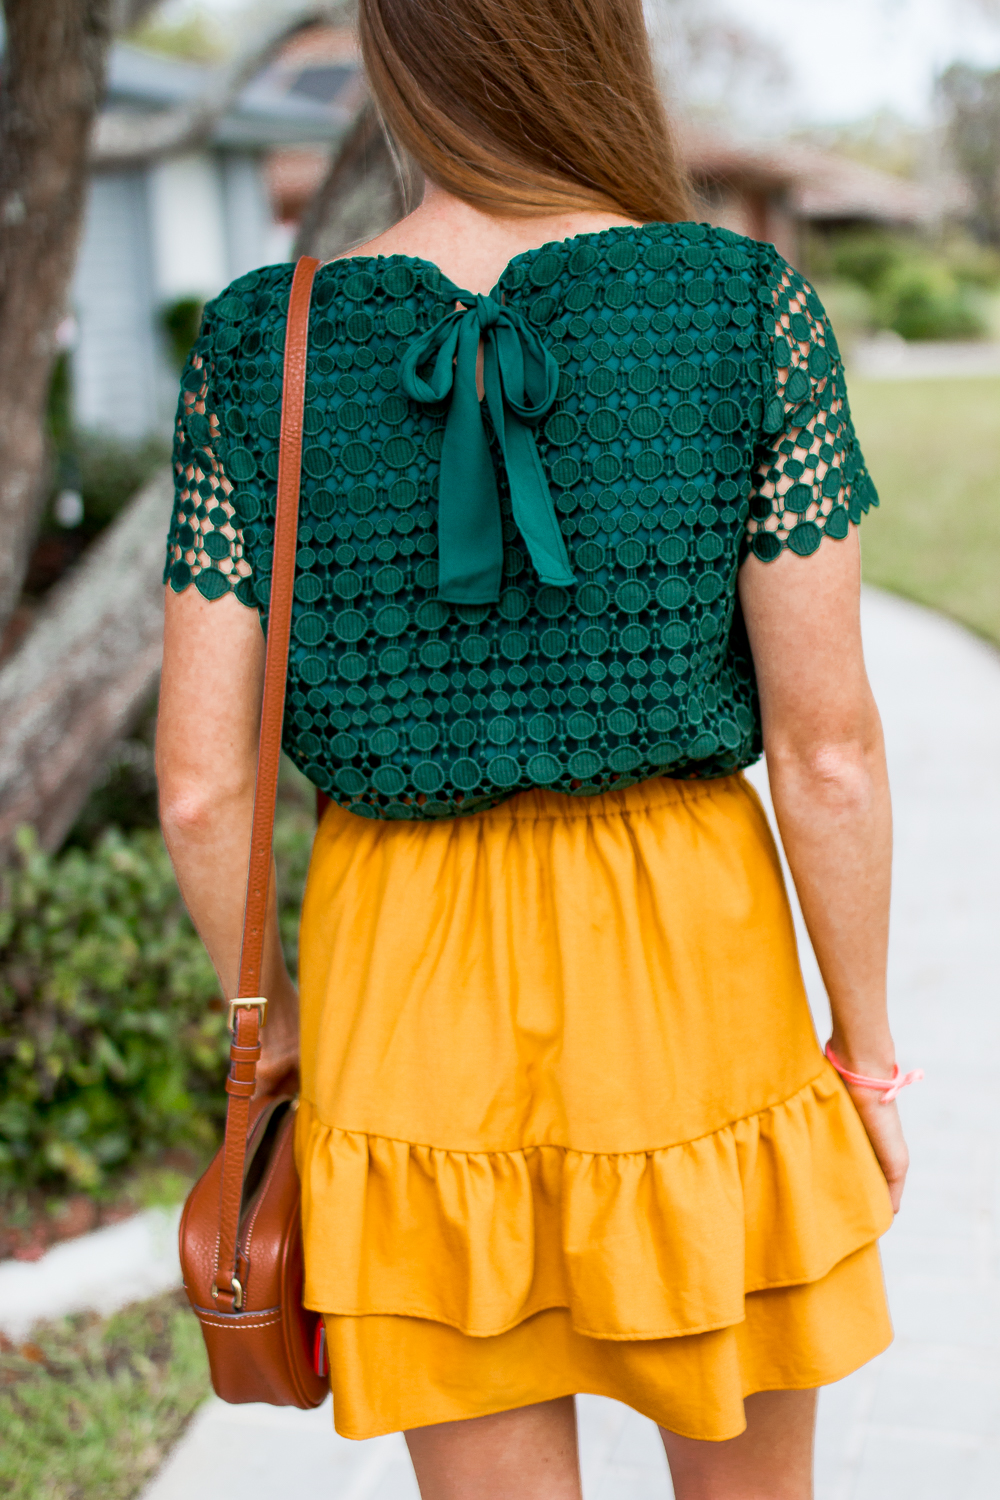 Mixing and Matching Seasonal Colors into Your Wardrobe | How to Dress for Fall | How to Incorporate Fall Colors in Your Wardrobe | Fall Outfit Ideas 2018 | Mustard Ruffle Skirt | Emerald Top with Bow Tie - Sunshine Style